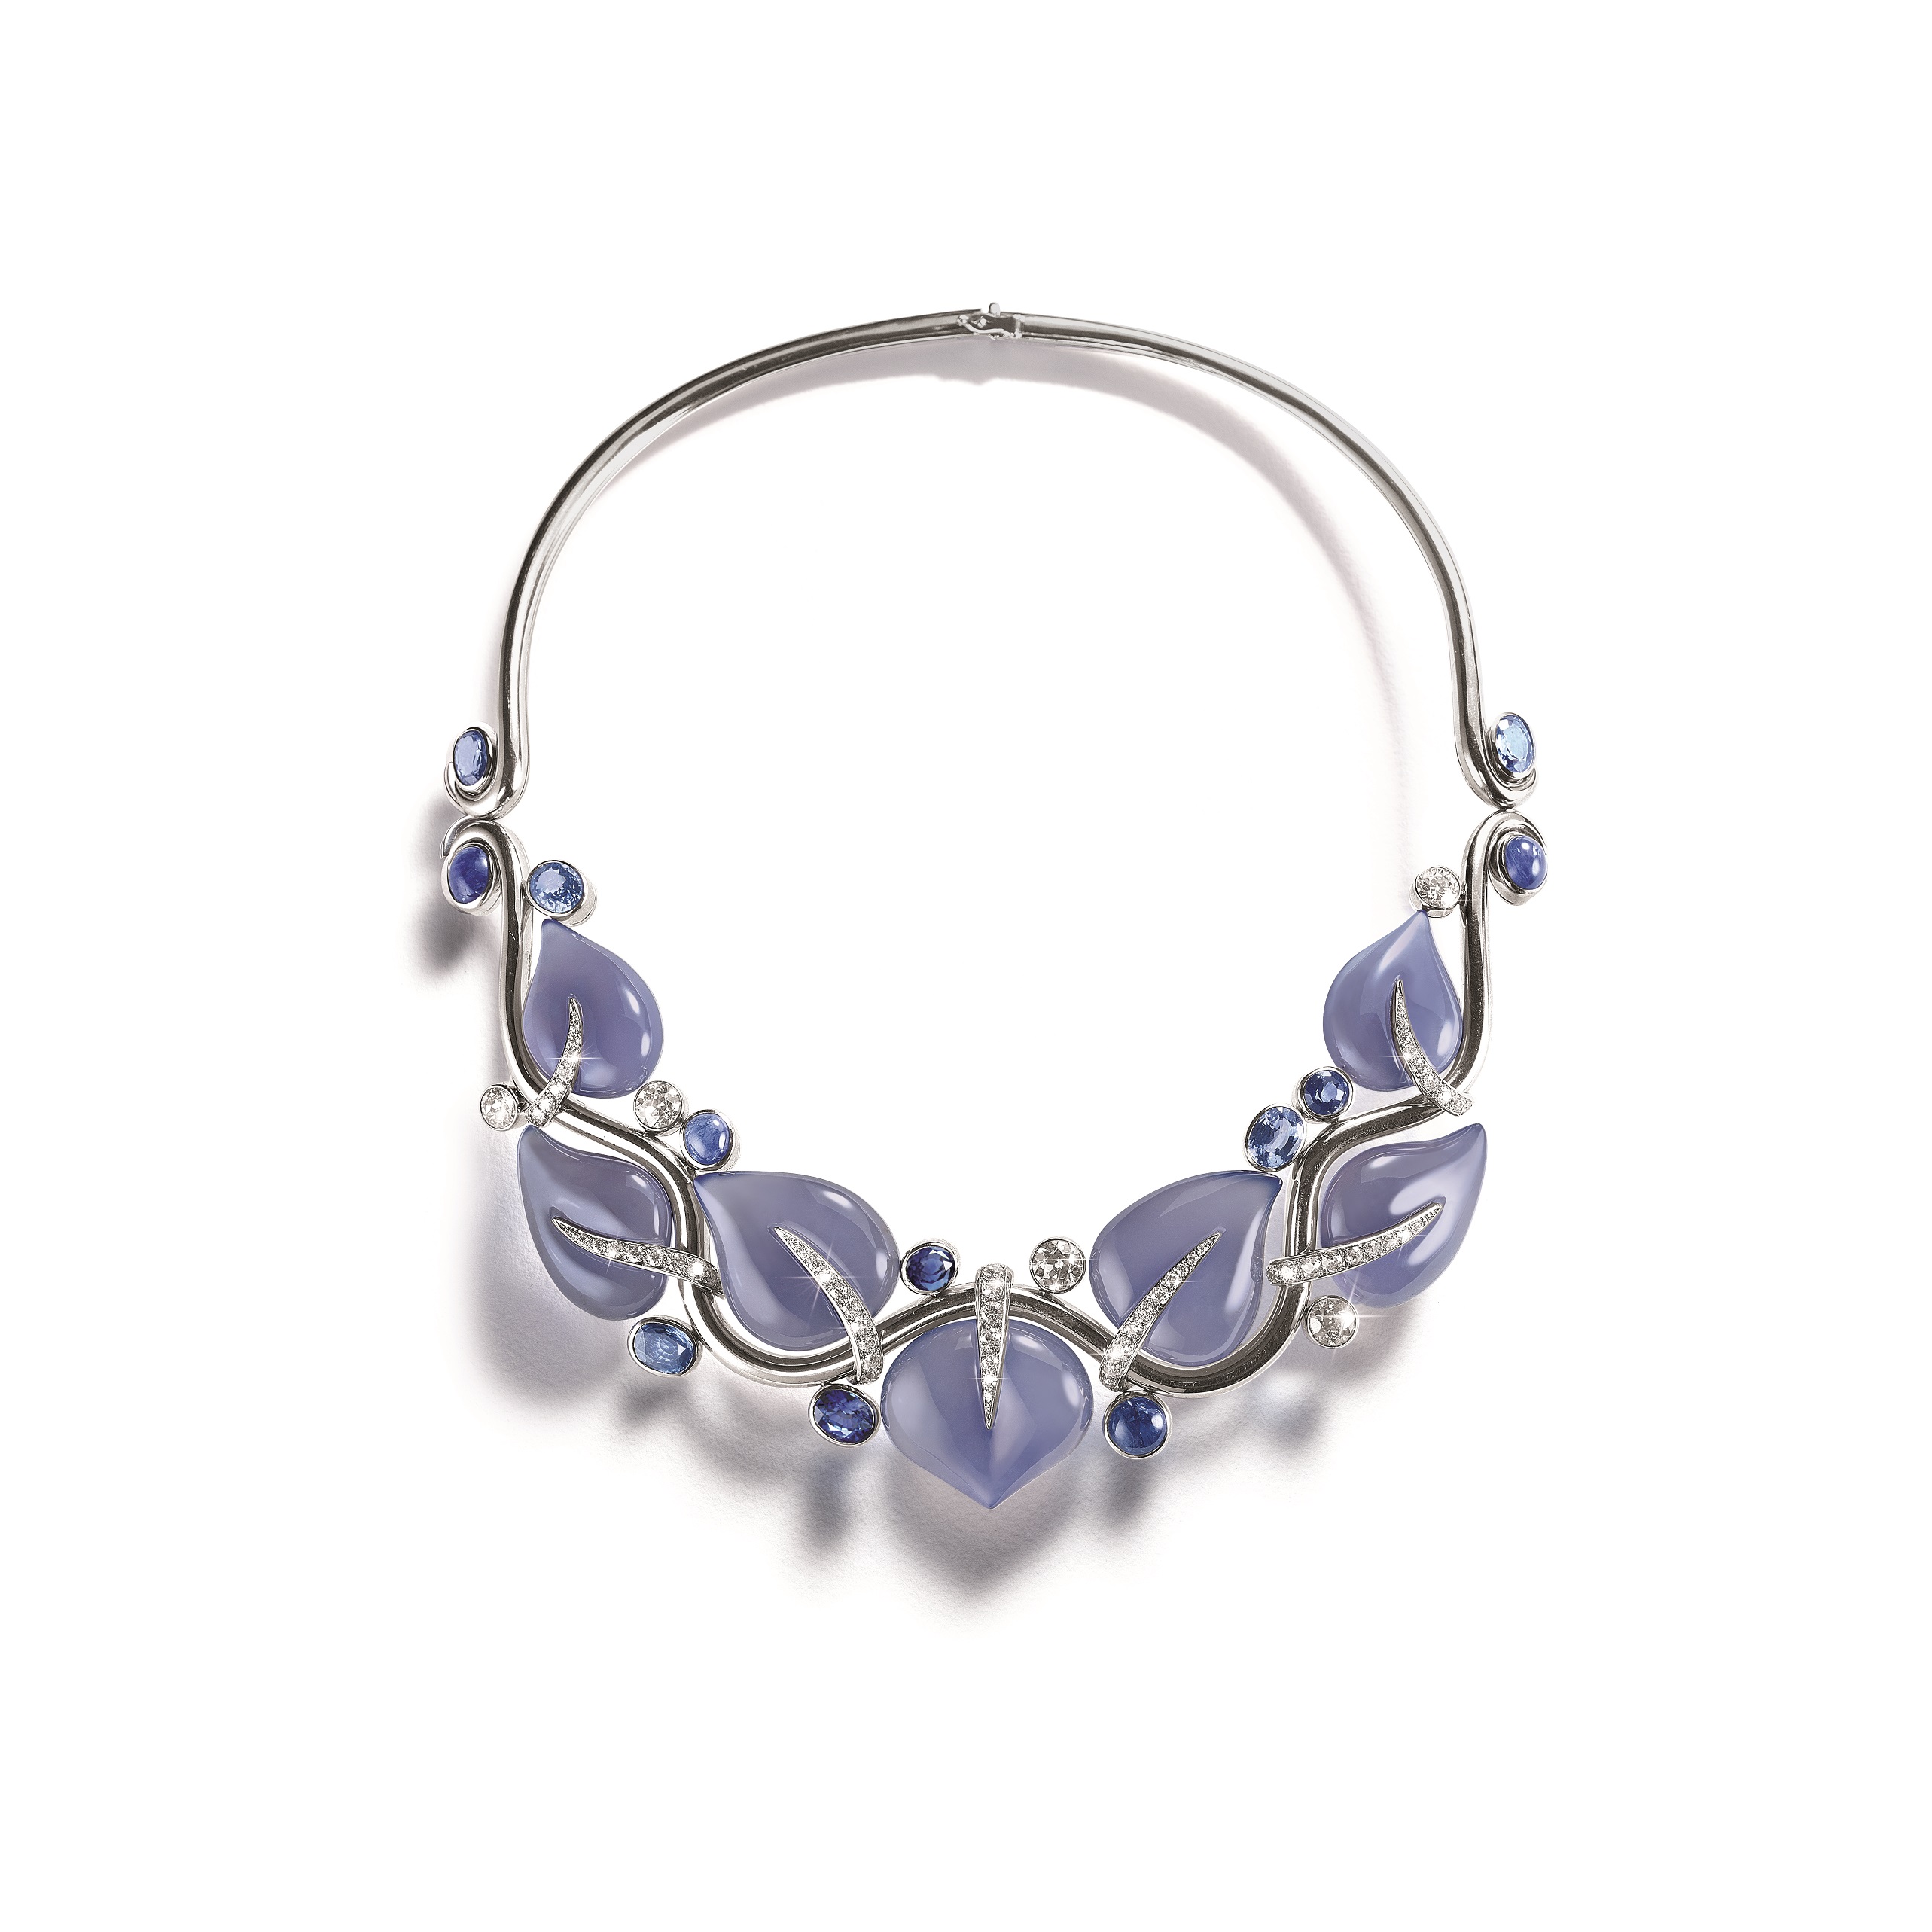 tefaf BELPERRON Leaves Necklace set with Carved Chalcedony and Sapphires